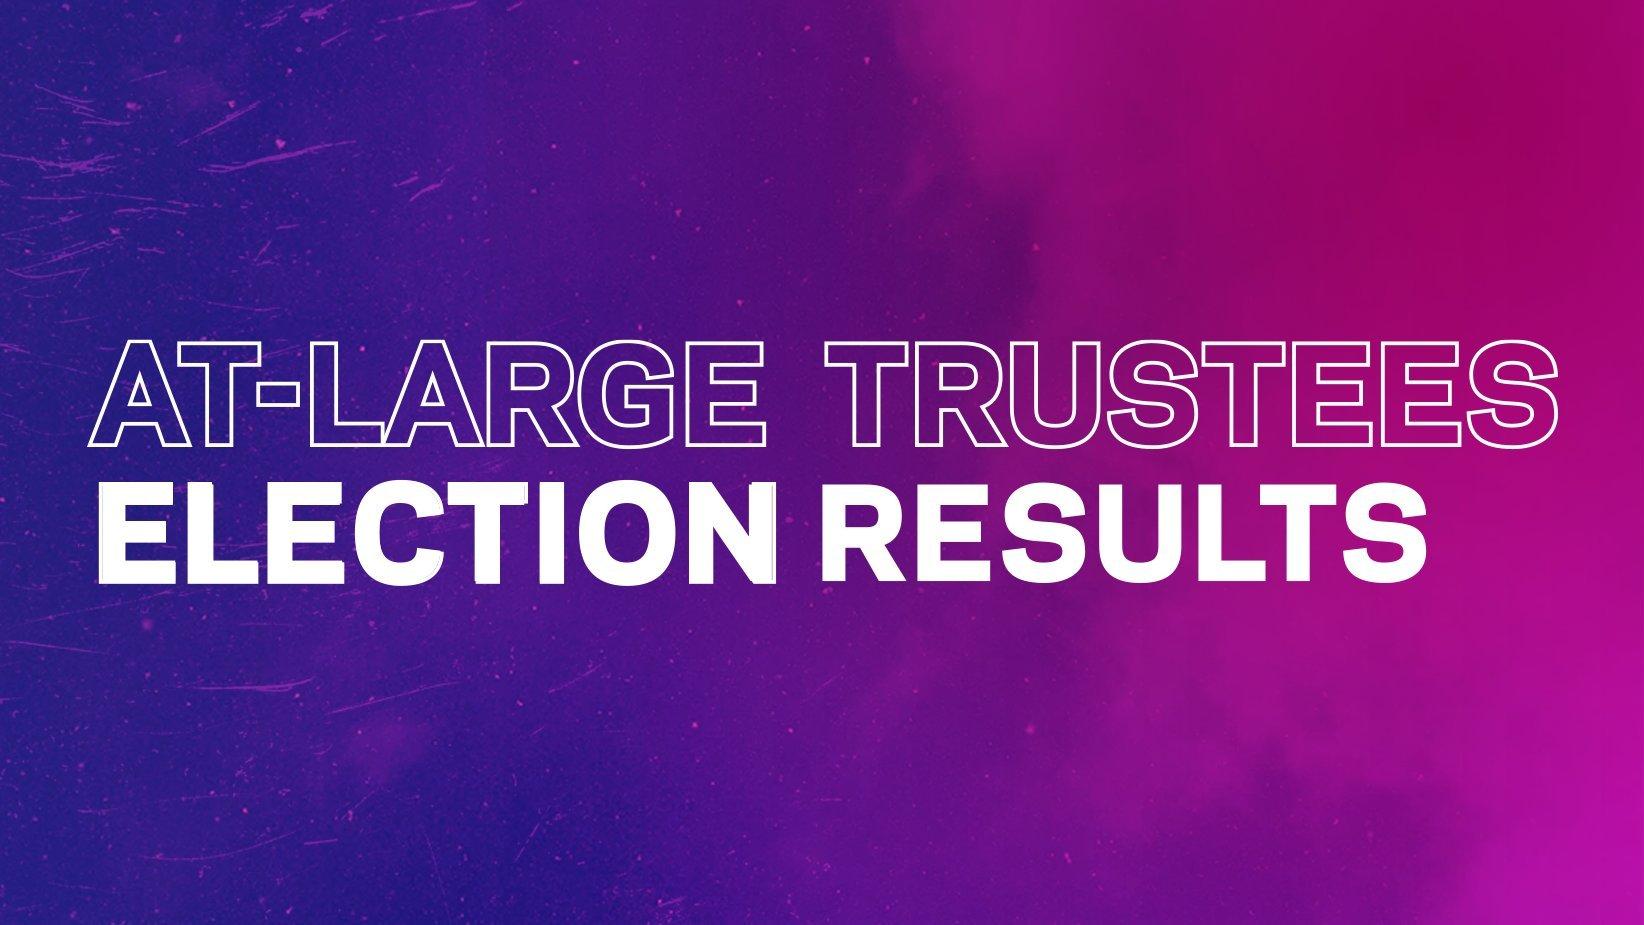 Artwork for At-Large Trustees Election Results